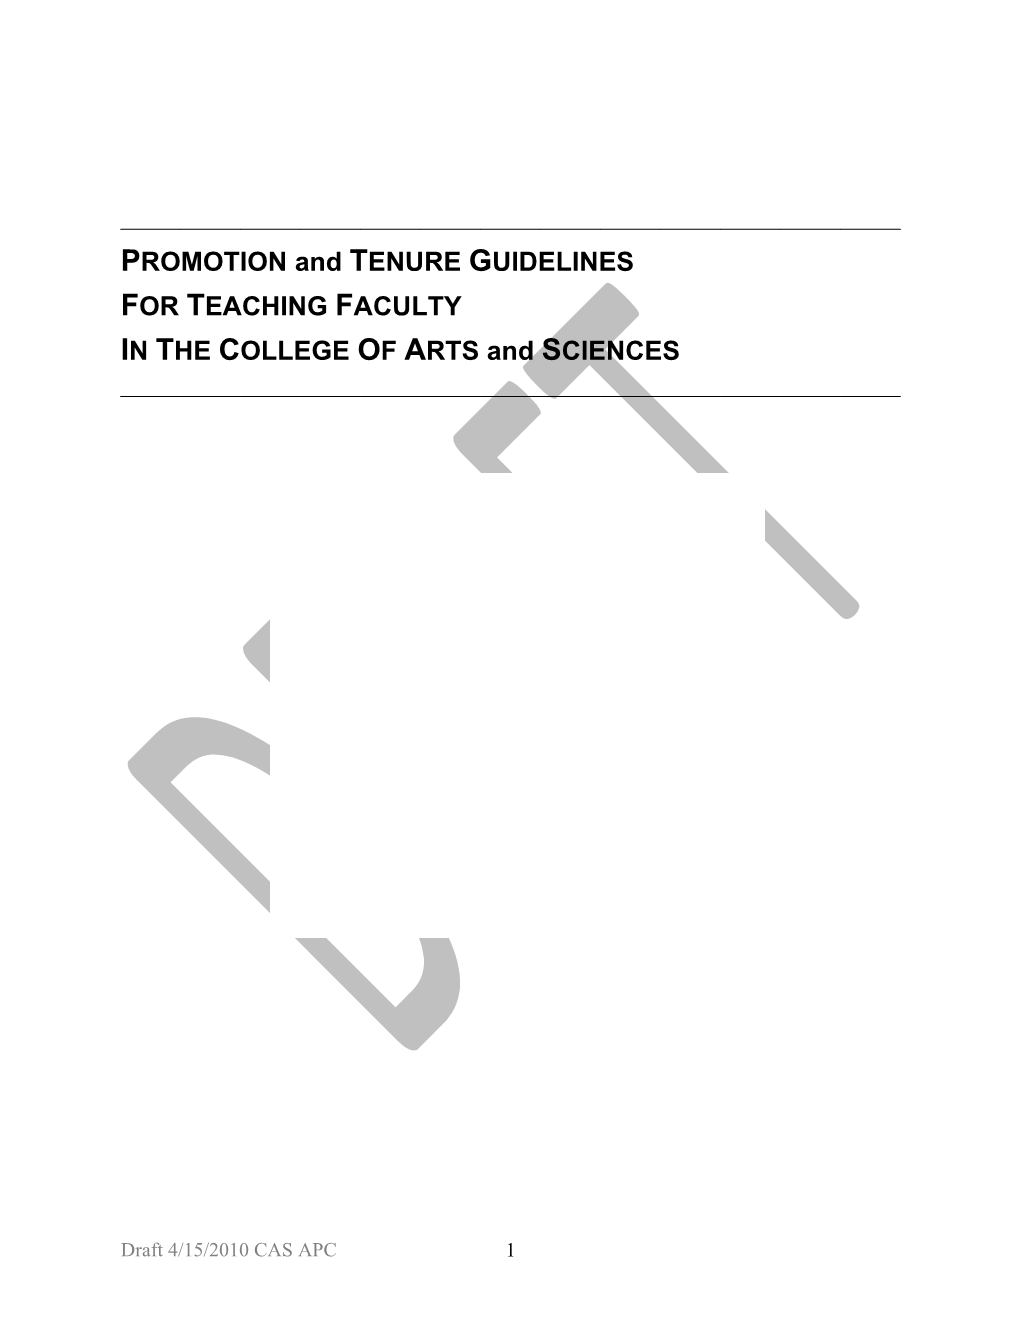 CAS Guidelines for Promotion and Tenure